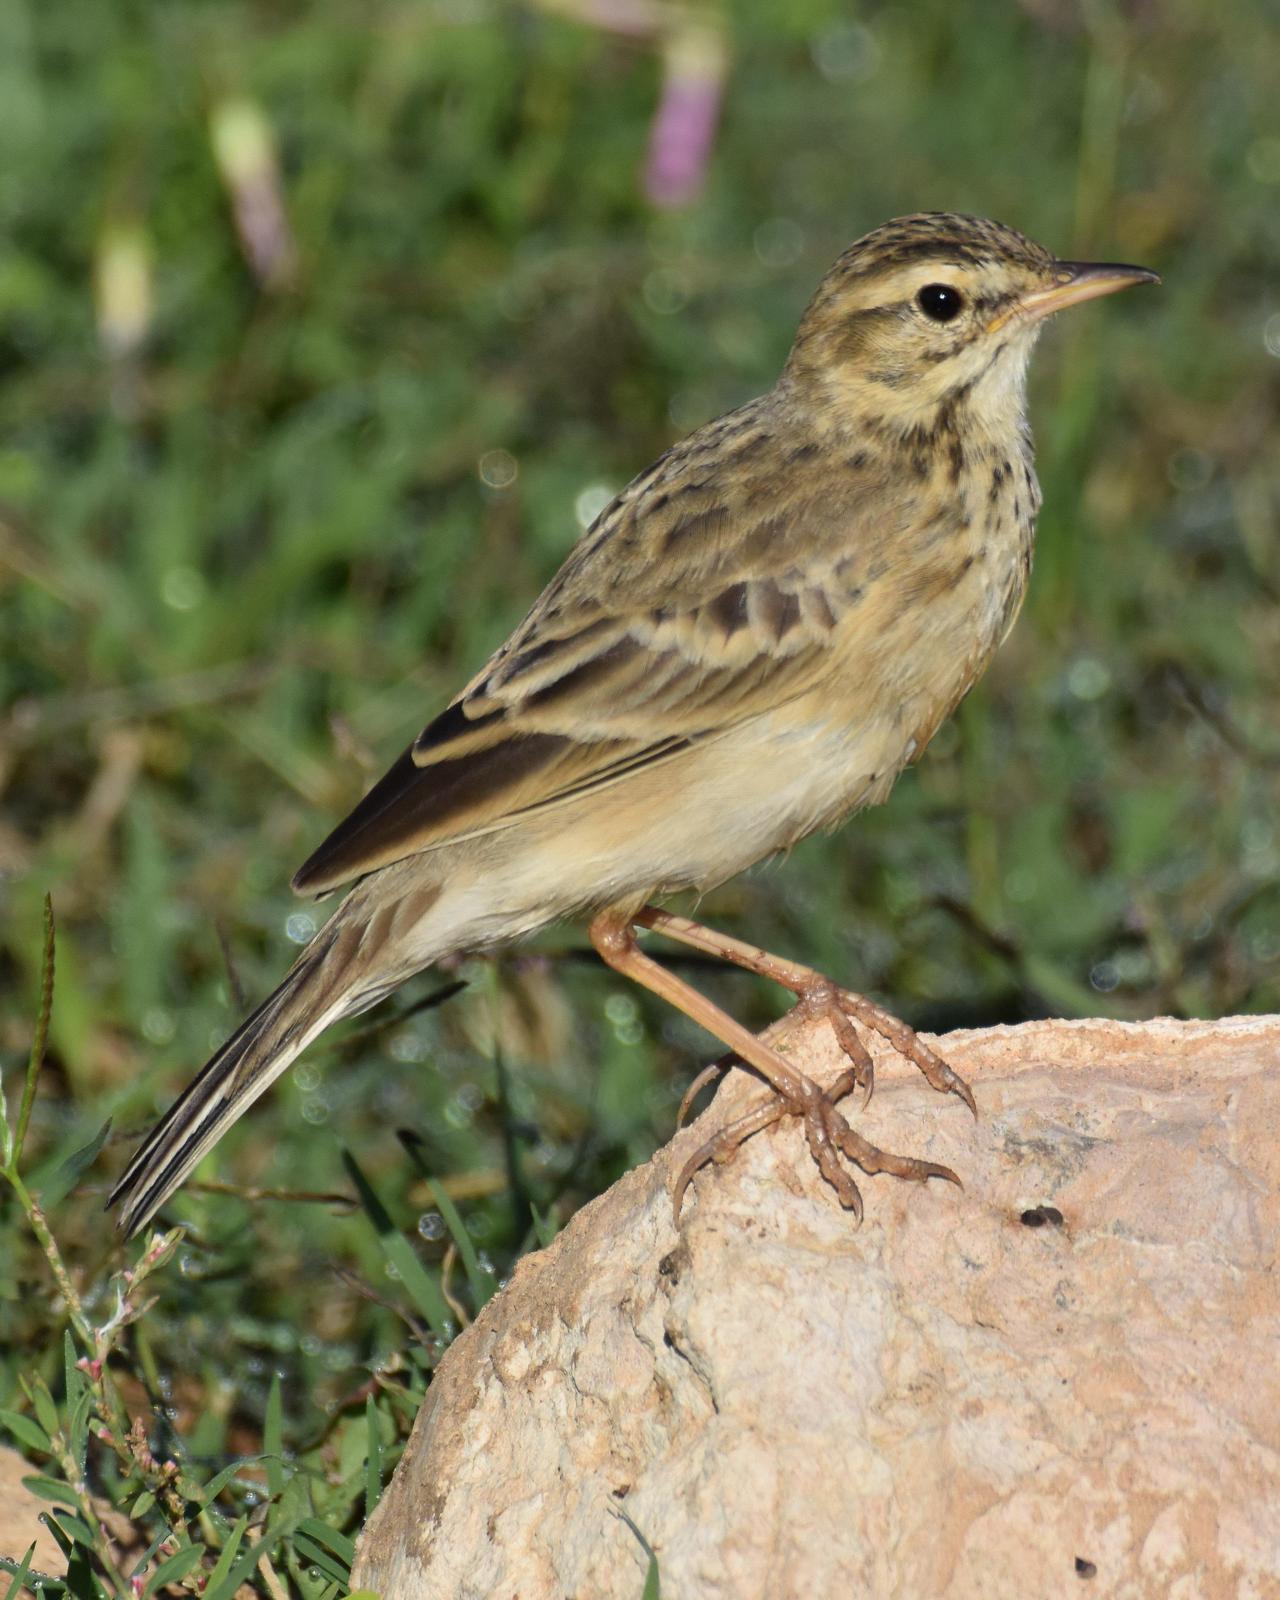 African Pipit Photo by Steve Percival